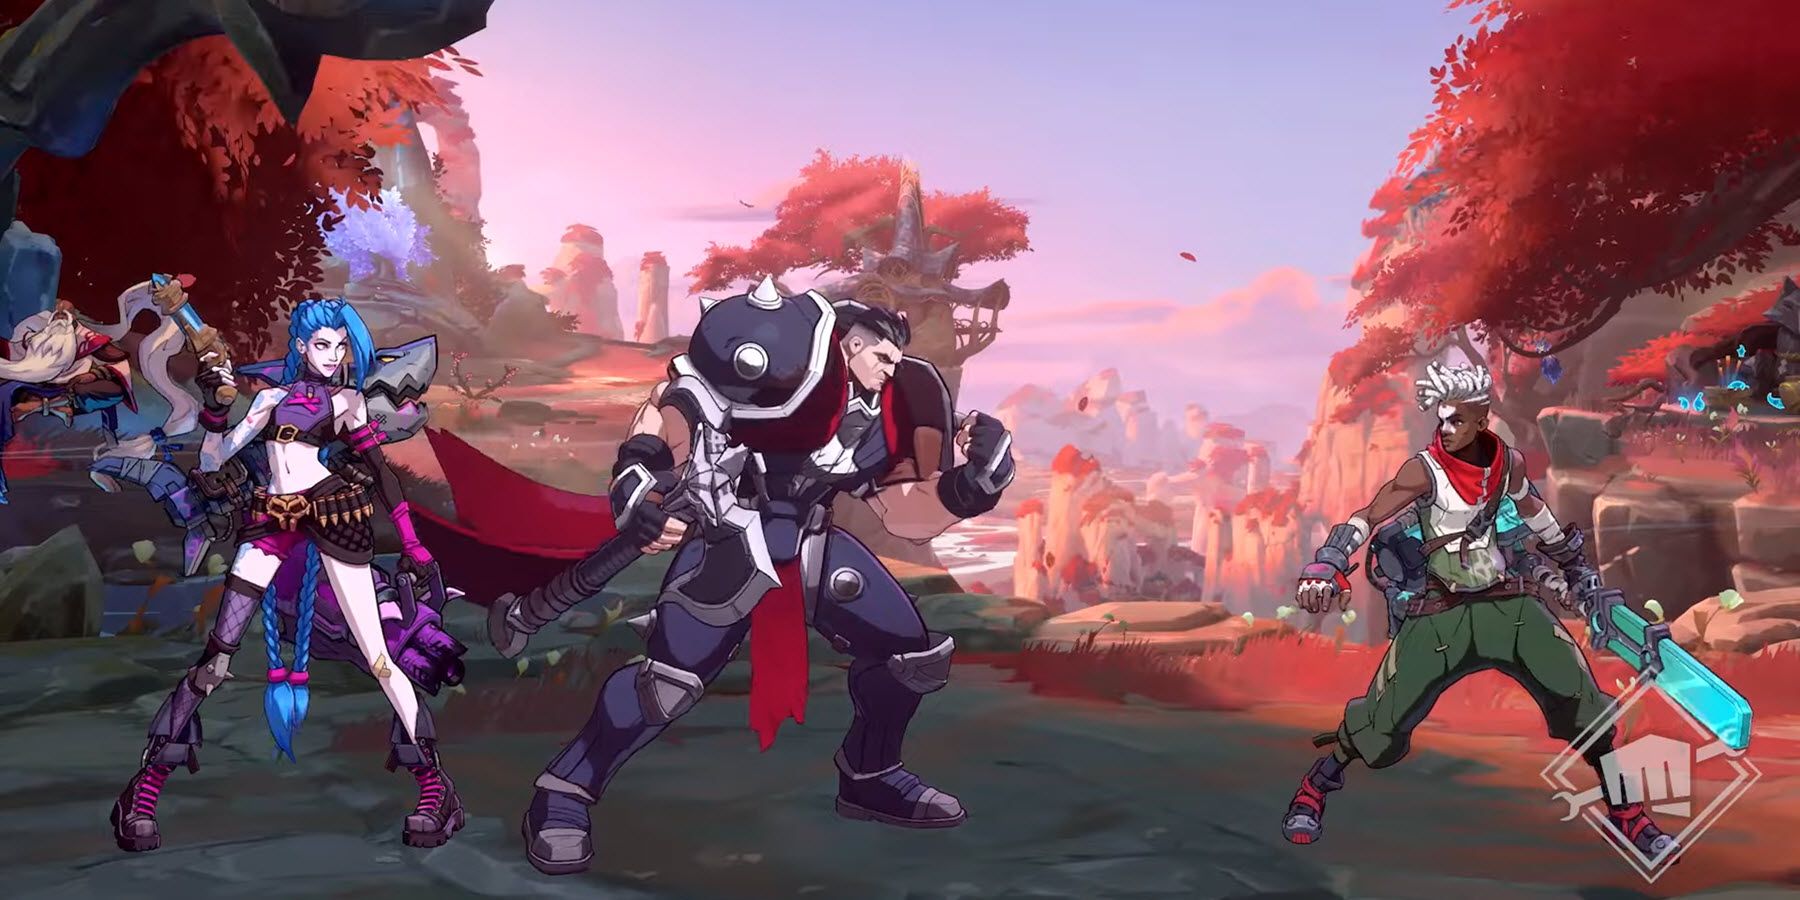 Project L update provides in-game look at Illaoi, gameplay footage